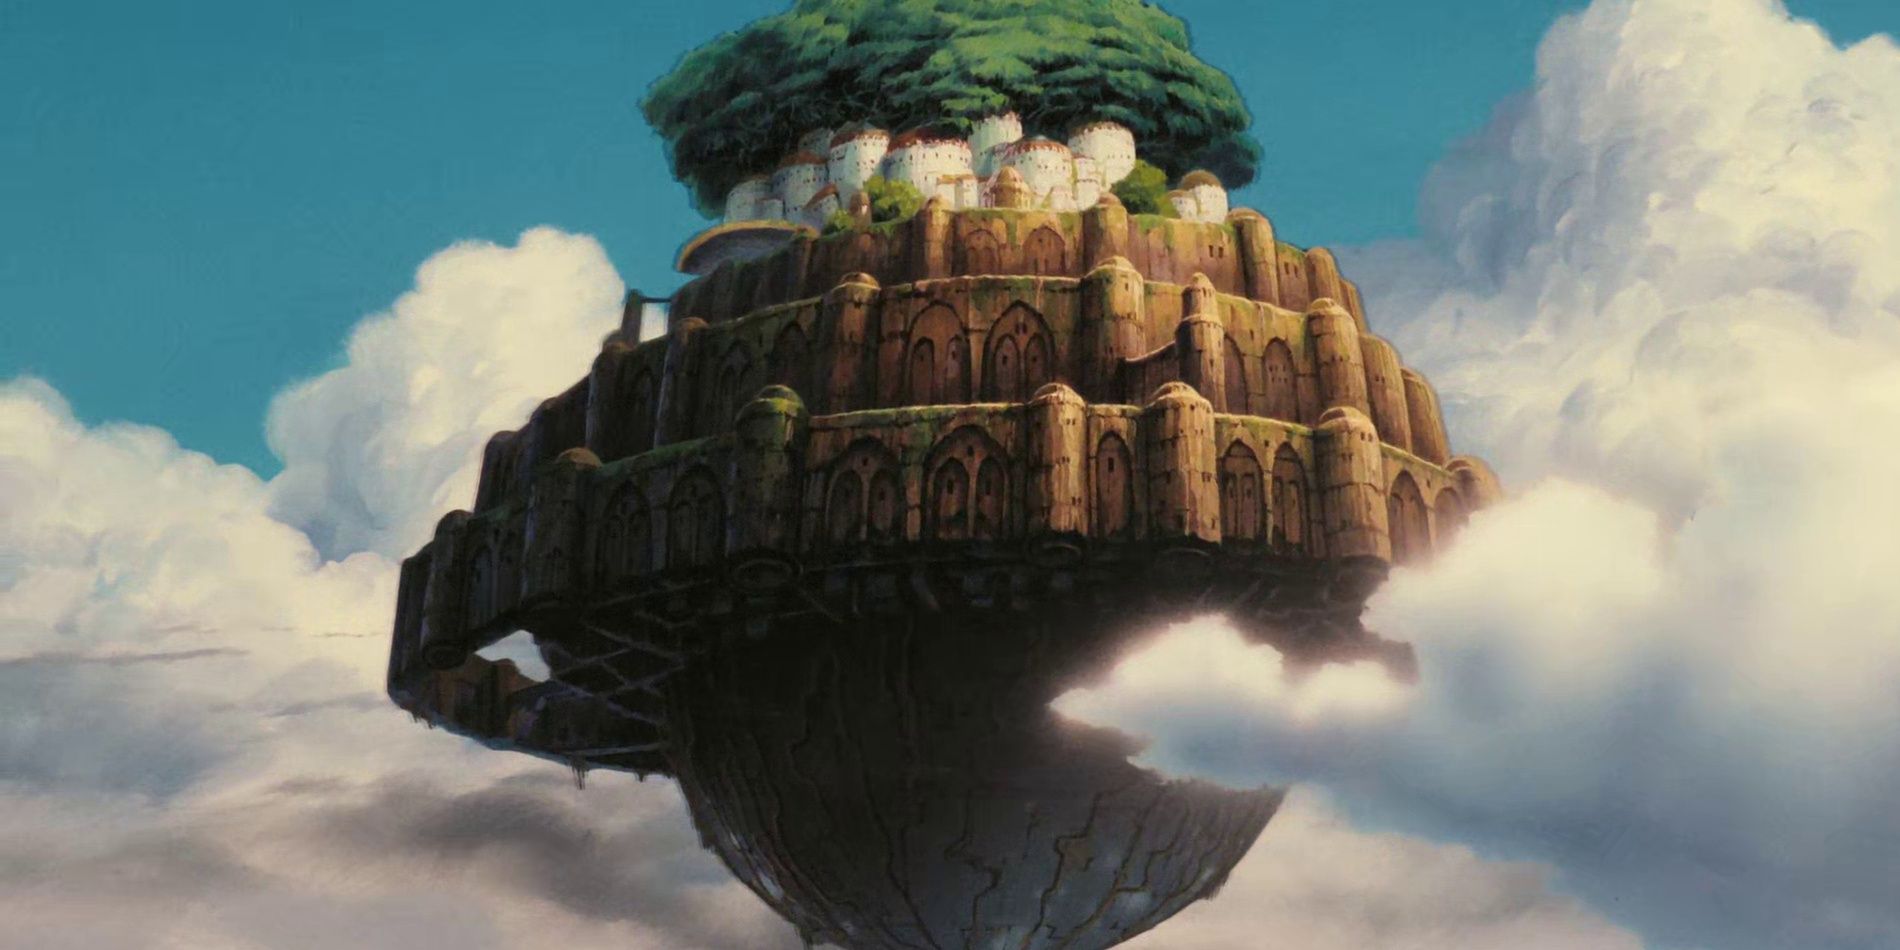 An image of Laputa in Castle in the Sky